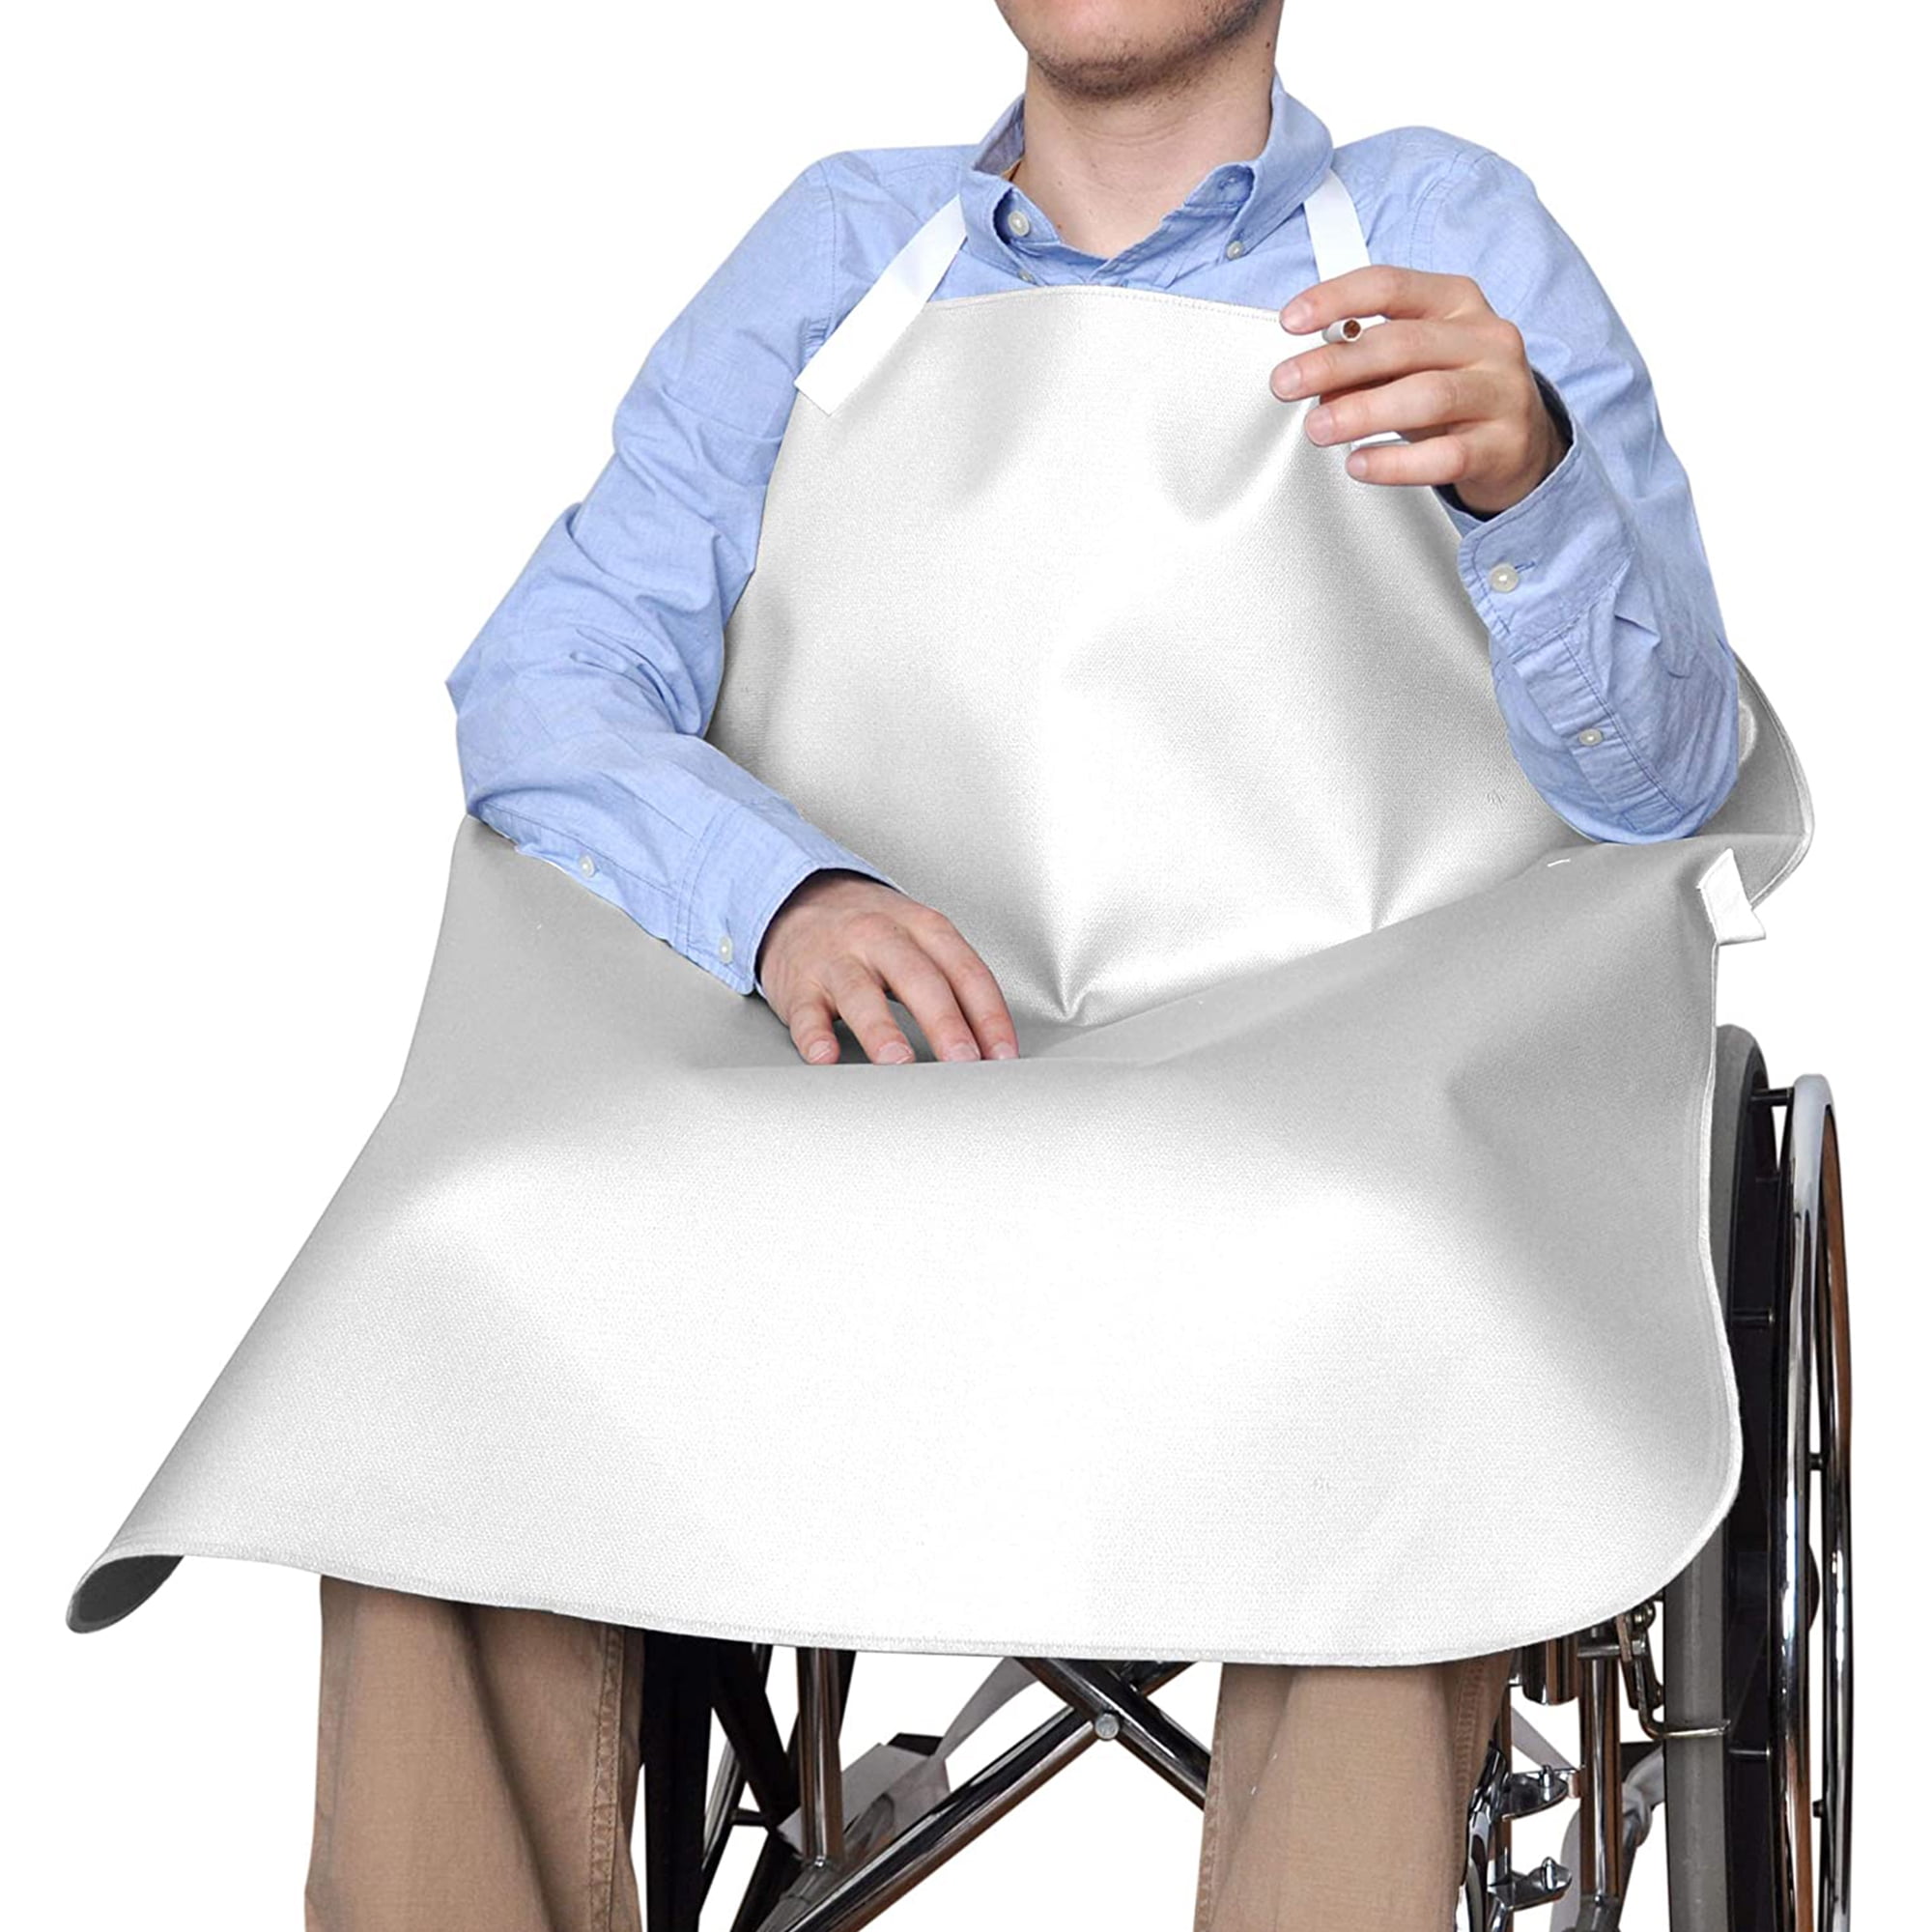 NYOrtho Heavy Duty Smoker’s Apron for Geri-Chair Bound Patients, Standard  White